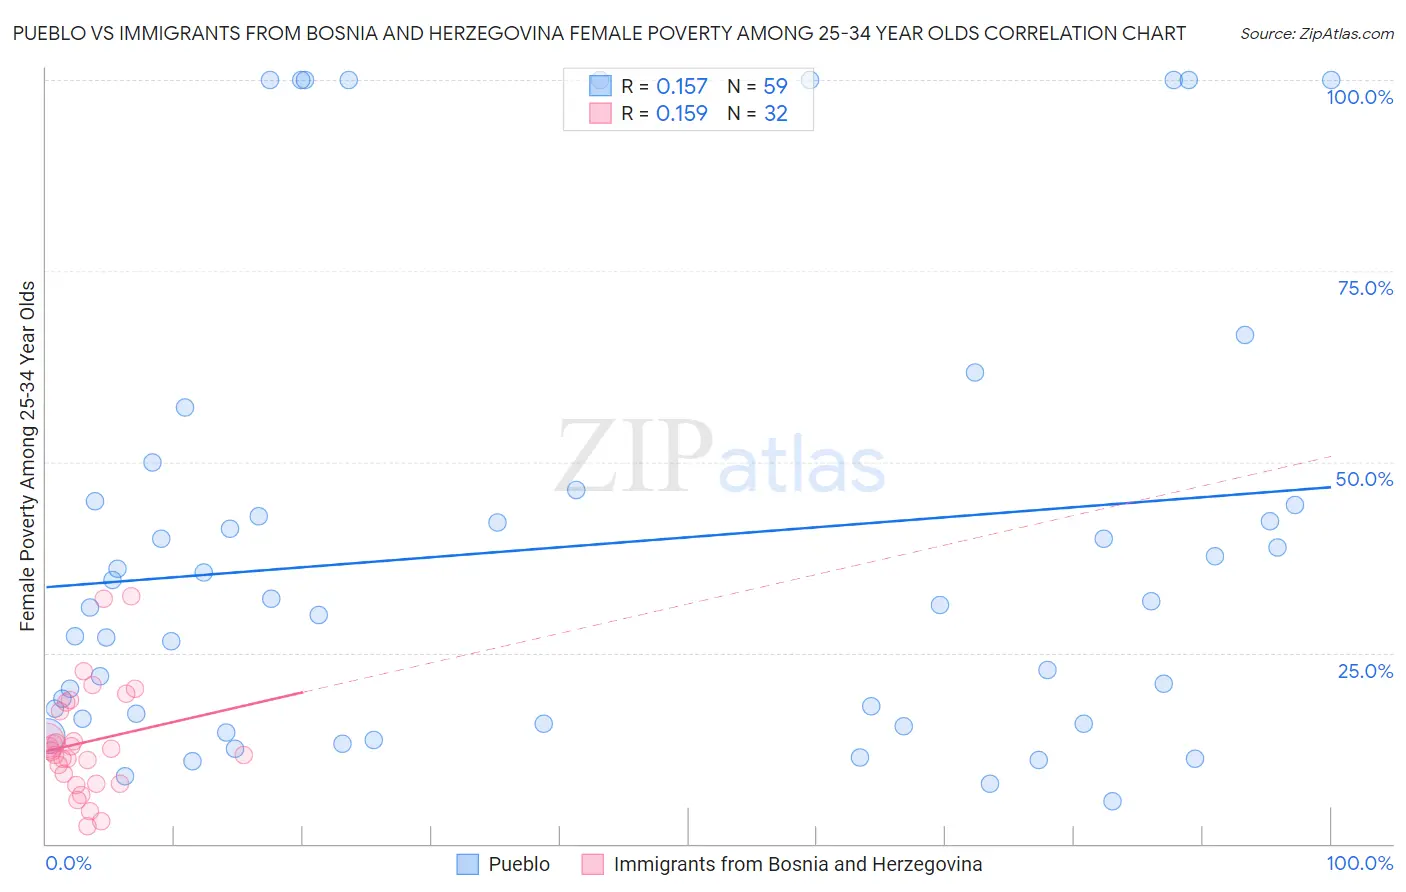 Pueblo vs Immigrants from Bosnia and Herzegovina Female Poverty Among 25-34 Year Olds